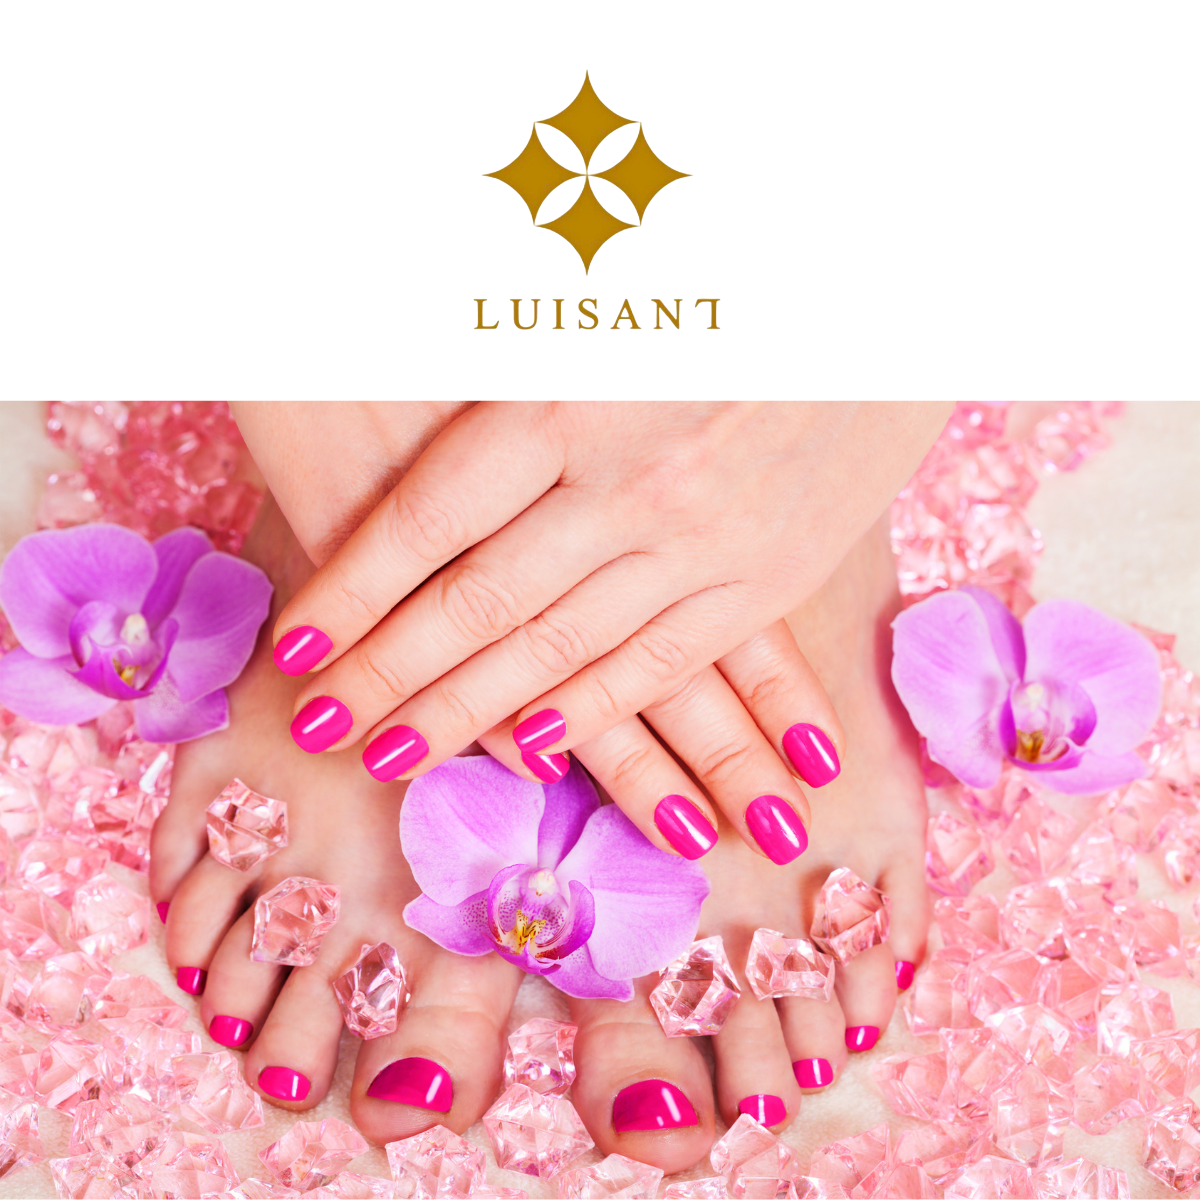 Luxury Parafin Manicure and Pedicure